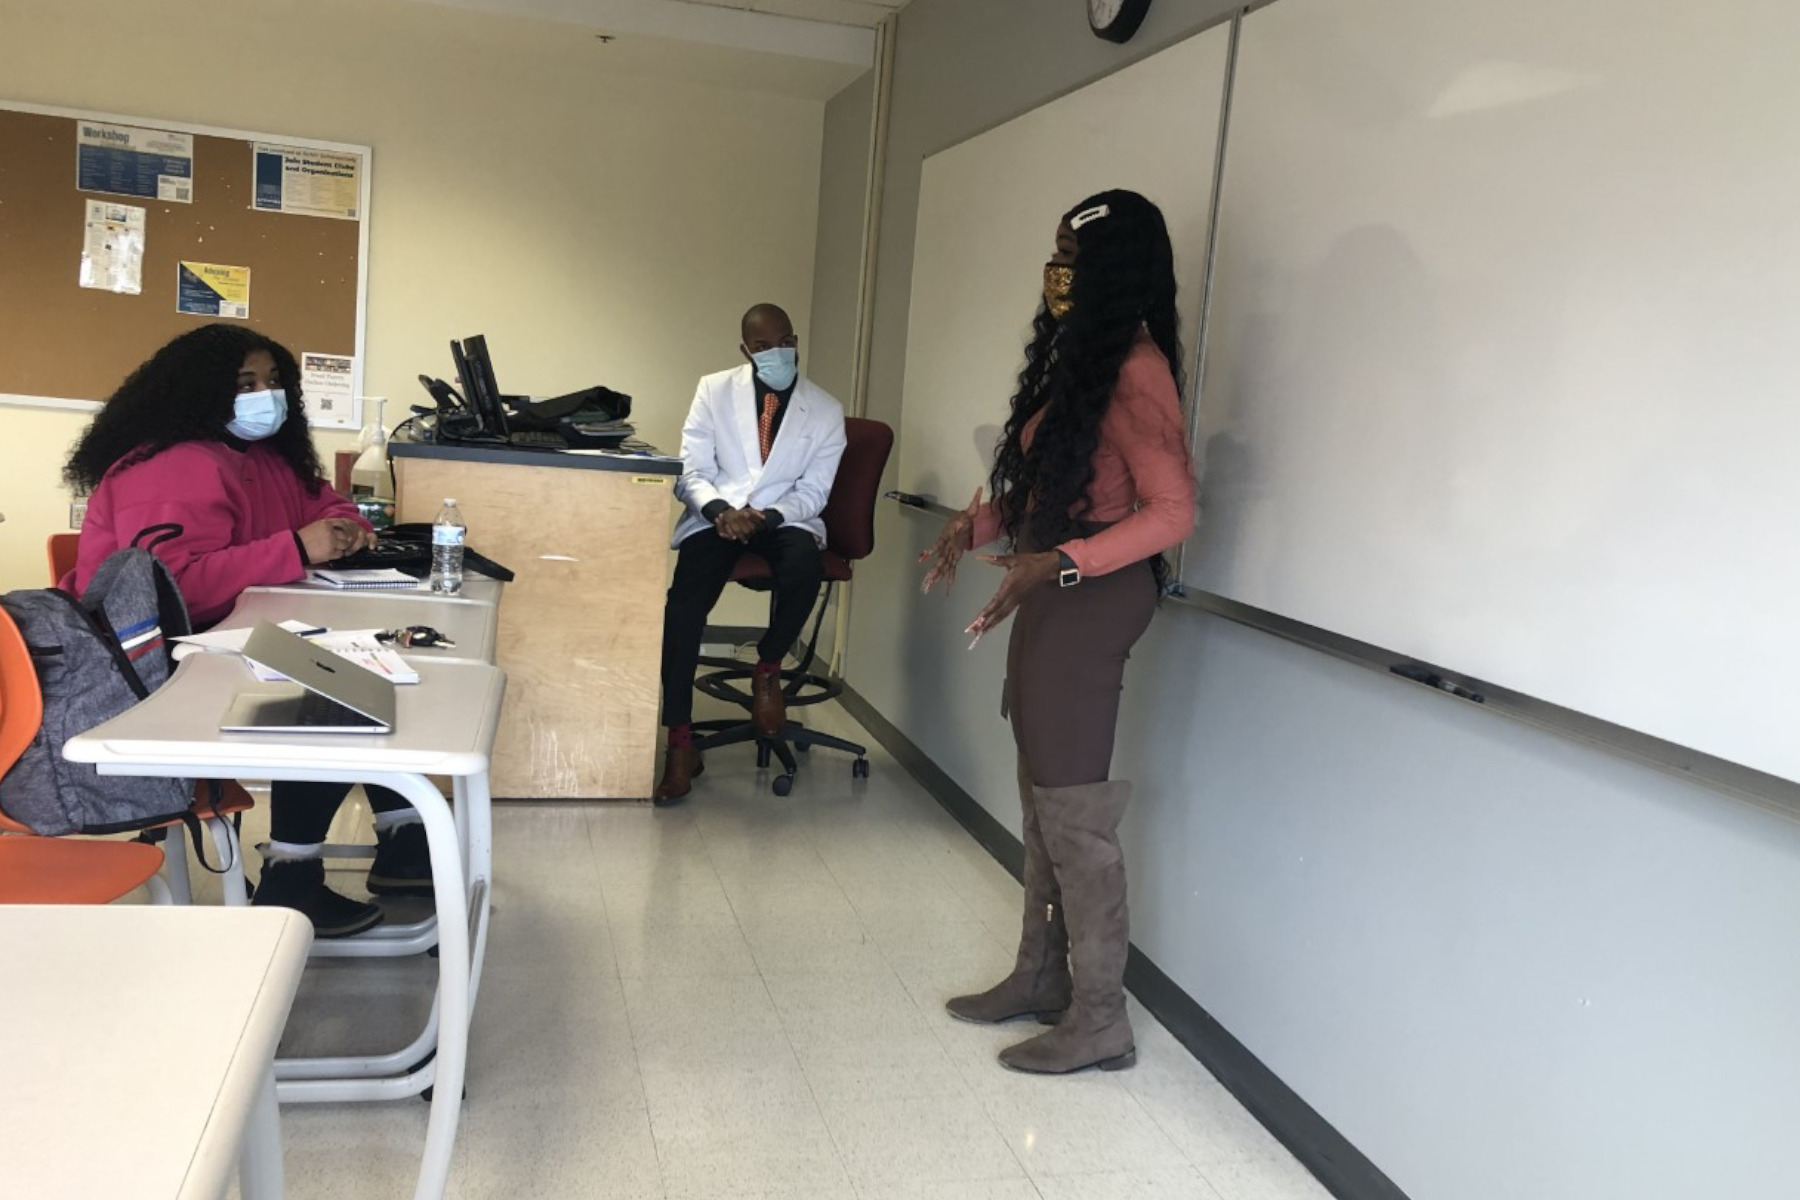 Ashley Dunbar, attorney, speaking to students in classroom